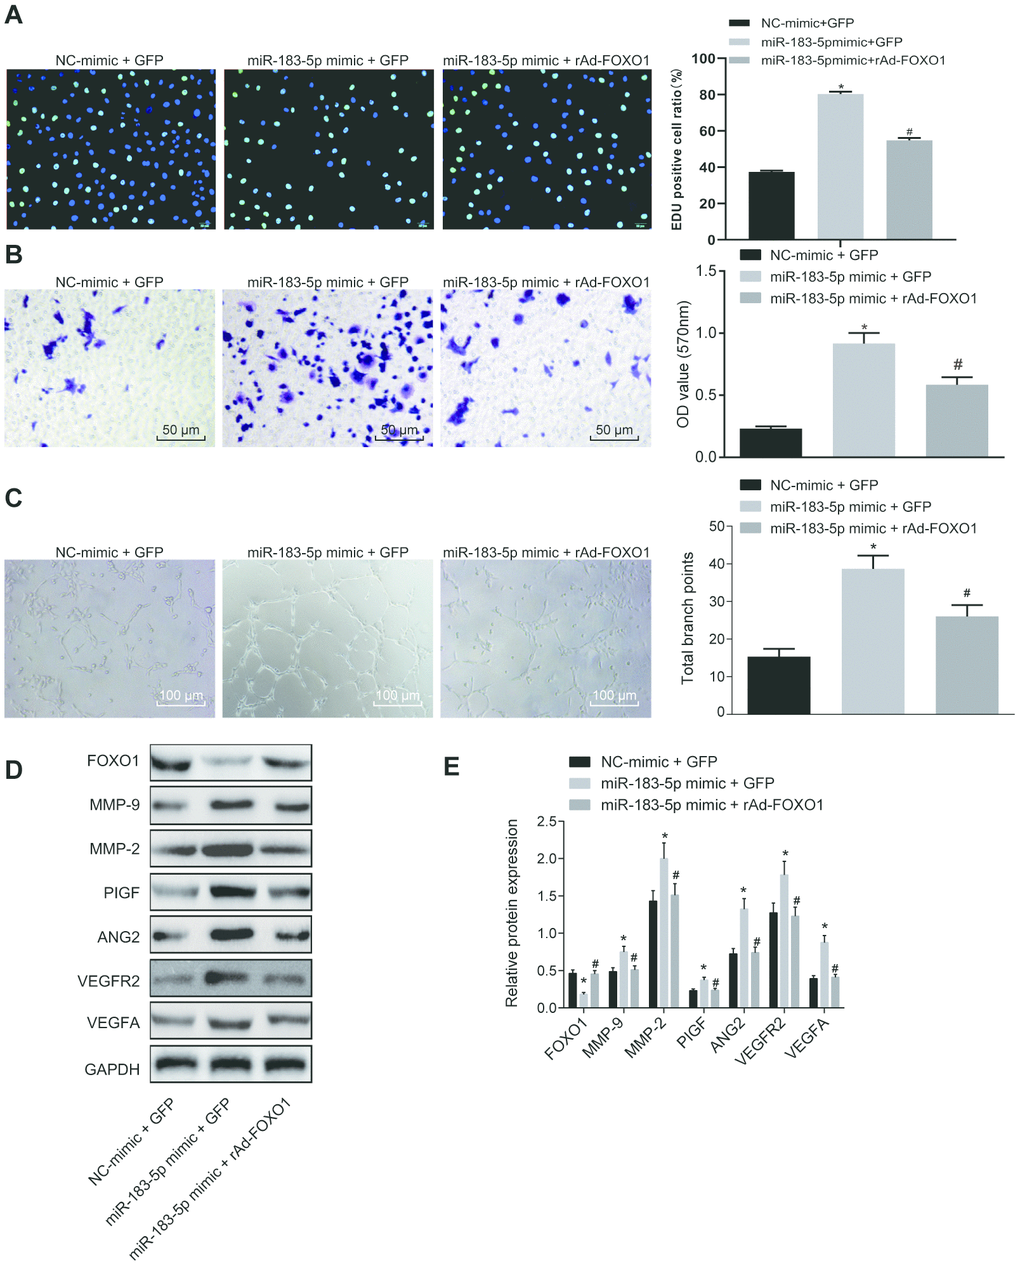 Overexpression of miR-183-5p promotes proliferation, migration and tube formation abilities of HMEC-1 cells by targeting FOXO1. (A) EdU assay was applied to detect proliferation of HMEC-1 cells after treatment of miR-183-5p mimic and rAd-FOXO1 (Scale bar = 50 μm); (B) HMEC-1 cell migration was detected by Transwell assay after treatment of miR-183-5p mimic and rAd-FOXO1 (Scale bar = 50 μm); (C) tube formation abilities of HMEC-1 cell were detected by tube formation assay after treatment of miR-183-5p mimic and rAd-FOXO1(Scale bar = 100 μm); (D–E) expression of angiogenesis-related proteins (VEGFA, VEGFAR2, ANG2, PIGF, MMP-2 and MMP-9) and FOXO1 in HMEC-1 cells after treatment of miR-183-5p mimic and rAd-FOXO1 was also detected by western blot analysis; * p p 